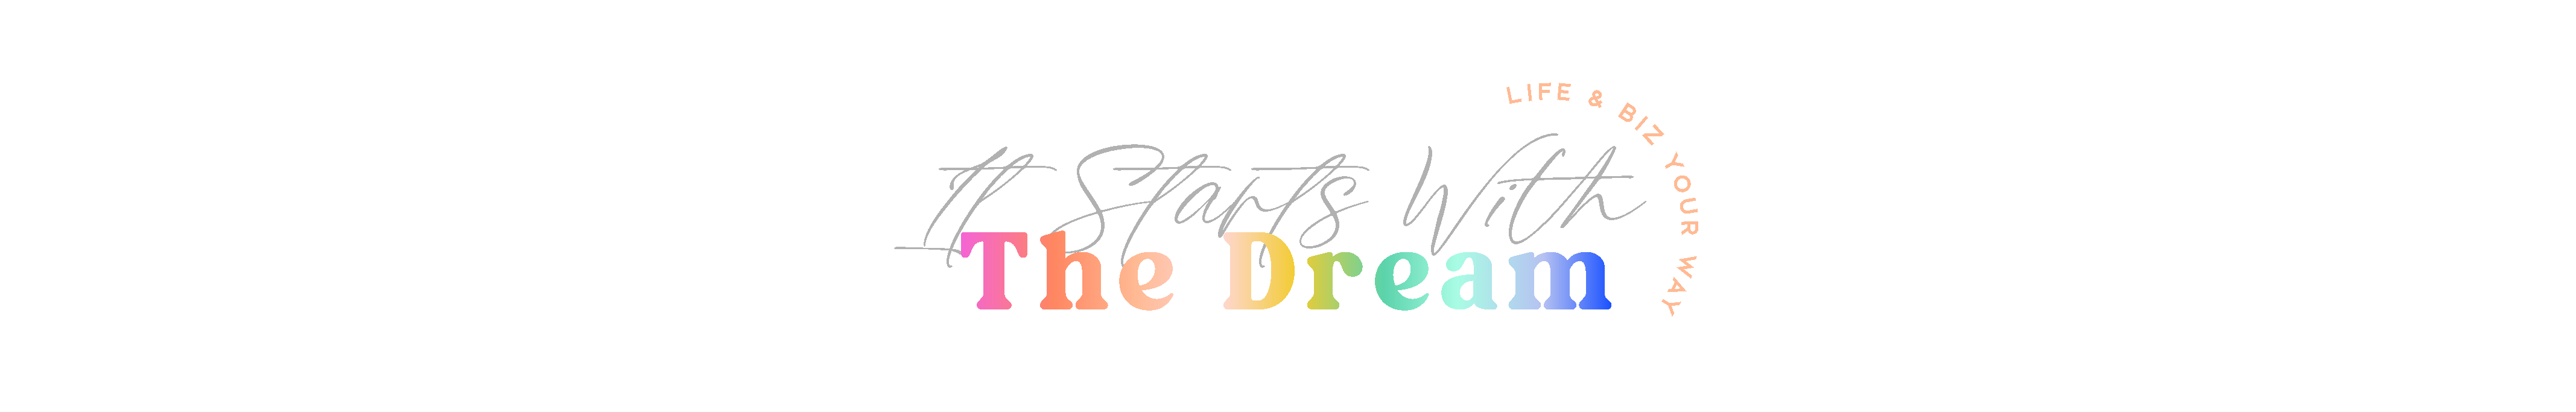 It starts with the dream